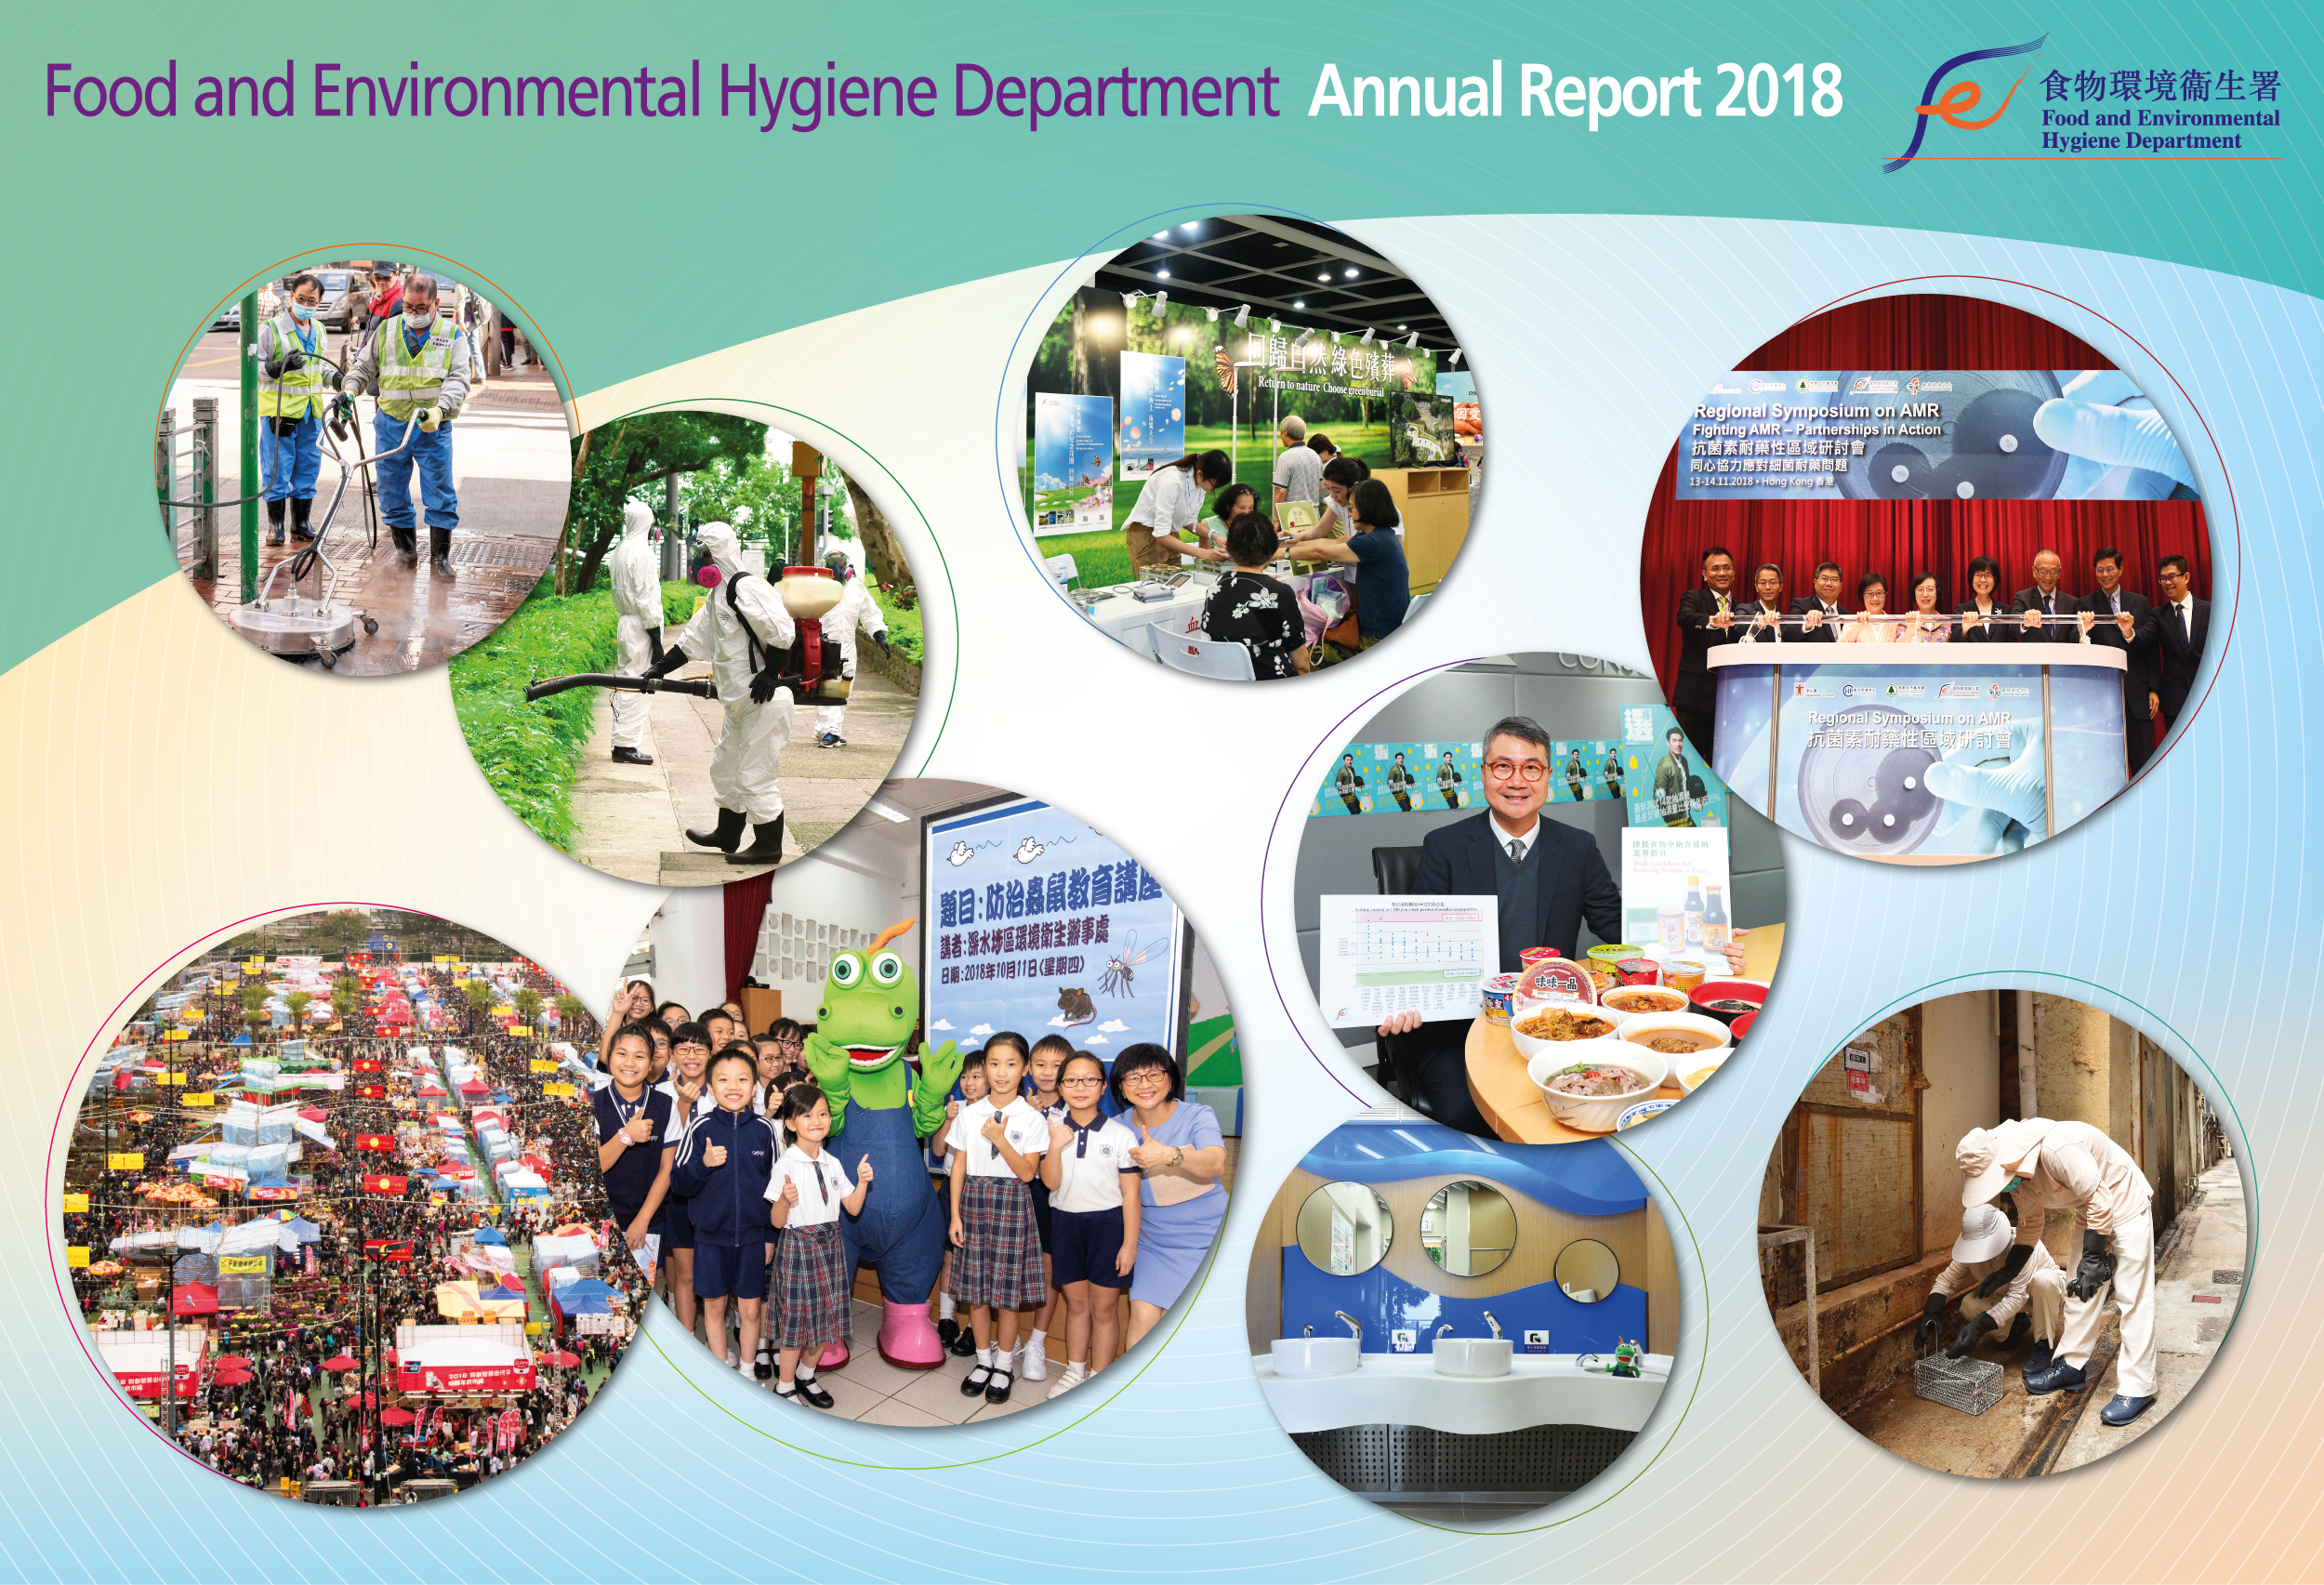 Cover Page of FEHD Annual Report 2018